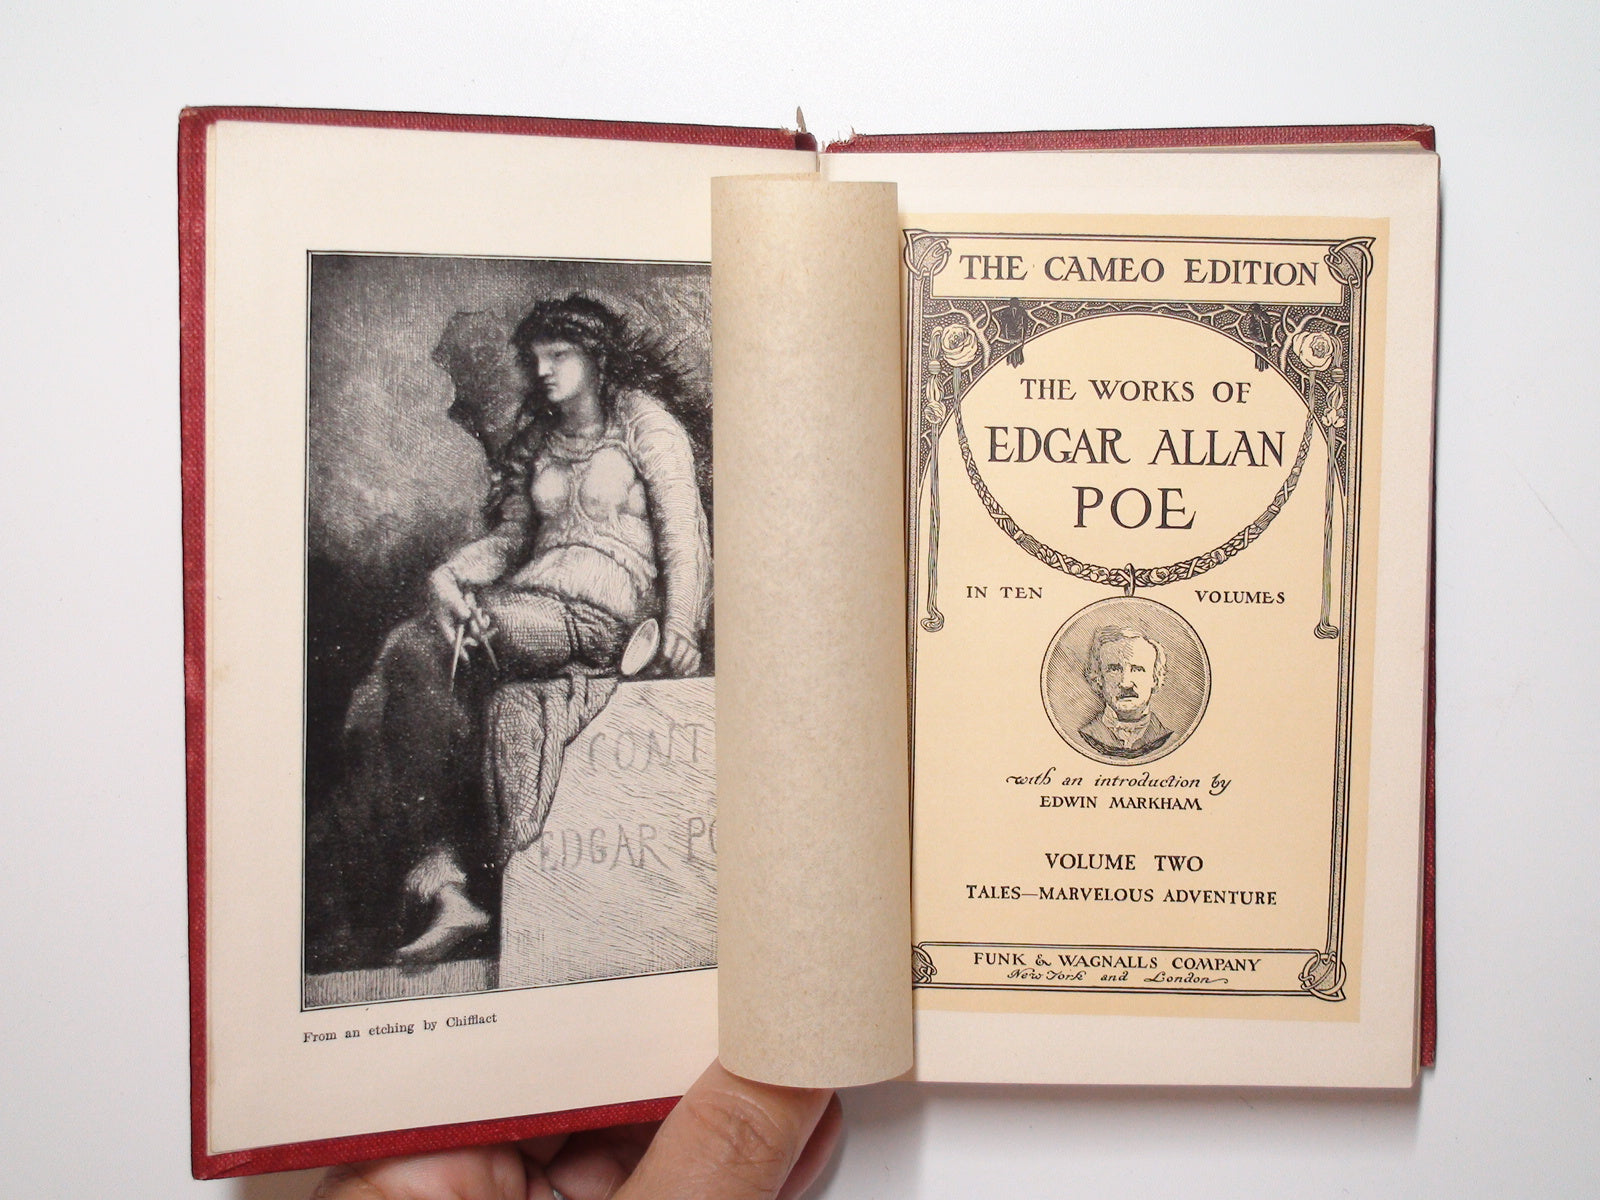 The Cameo Edition of the Works of Edgar Allan Poe, Vol 1-3, 9, 10, 1904